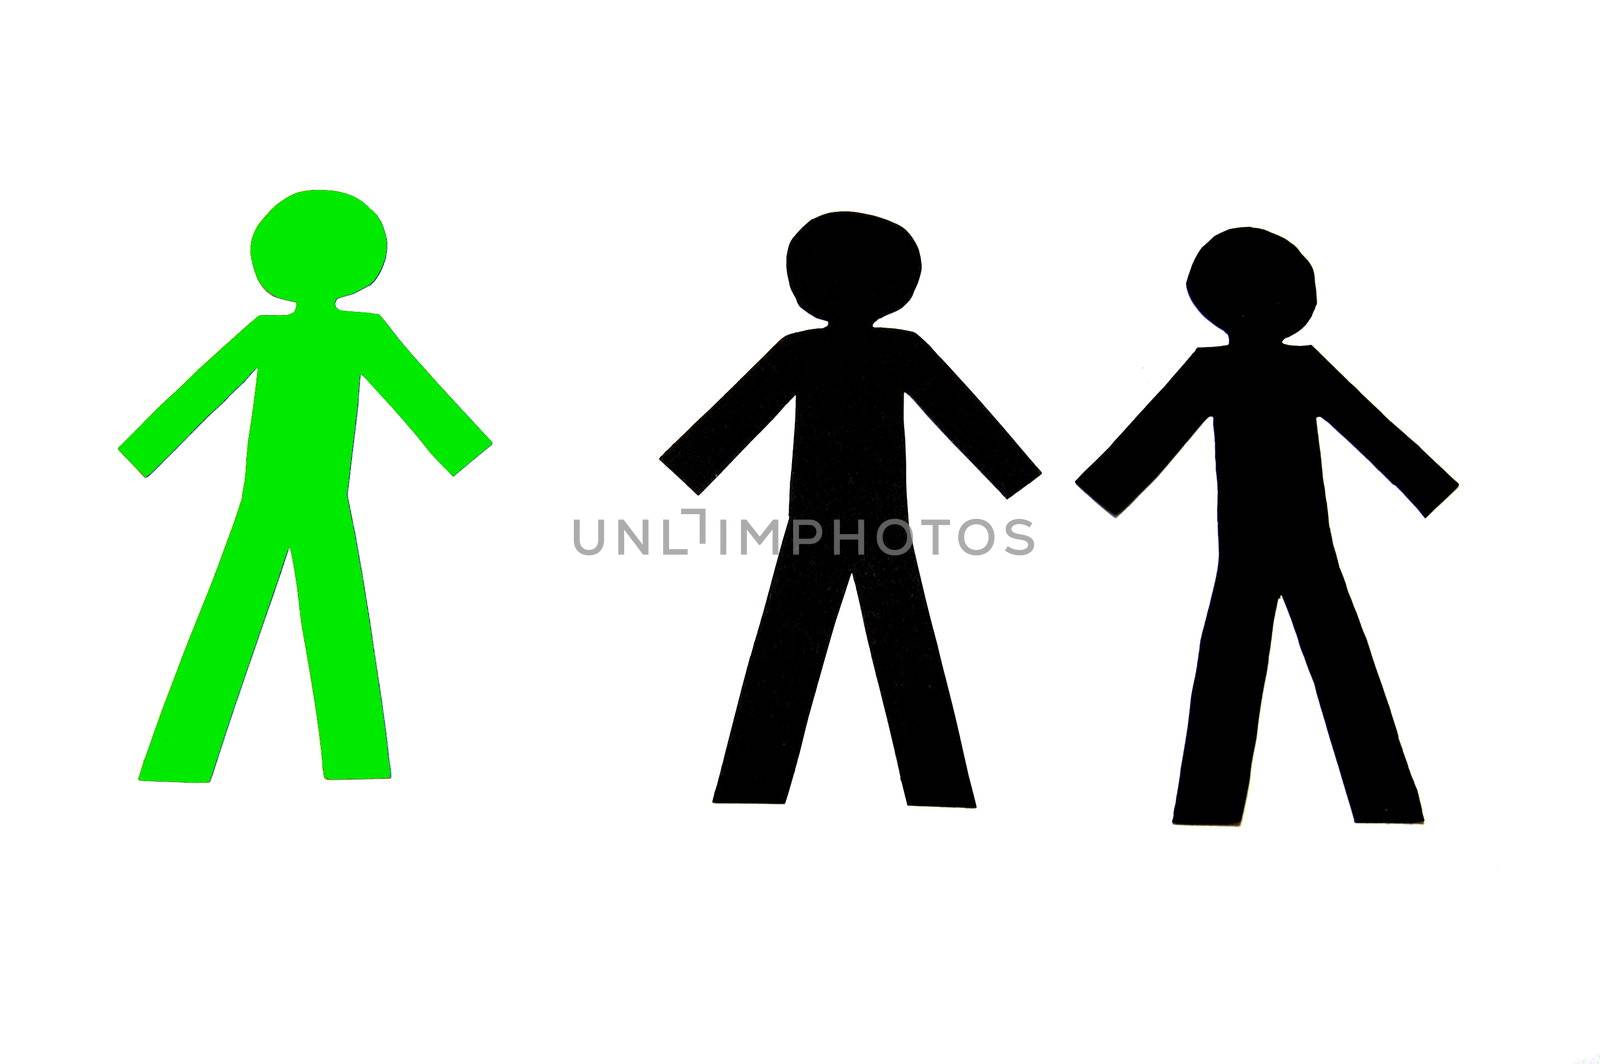 Some People made of Paper isolated on white background.